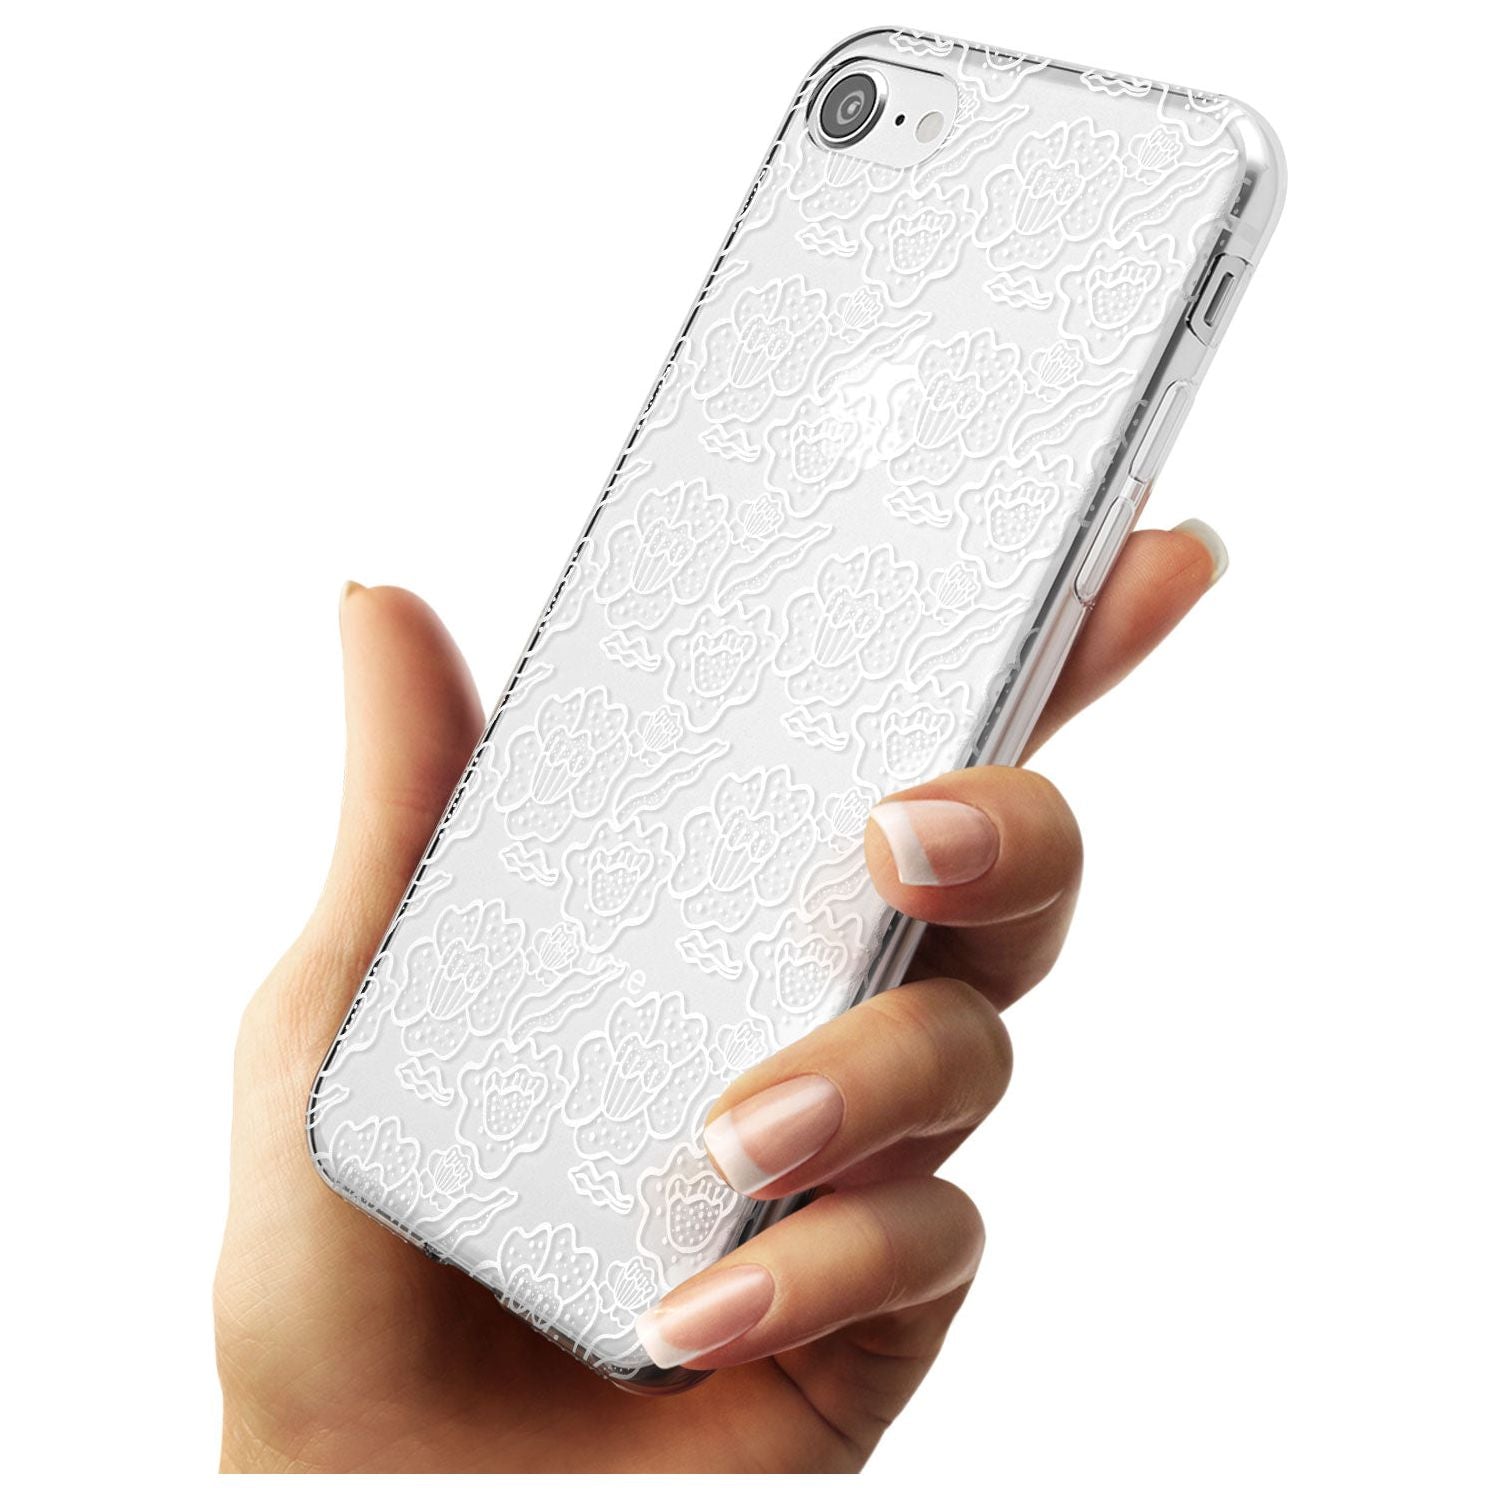 Funky Floral Patterns White on Clear Slim TPU Phone Case for iPhone SE 8 7 Plus